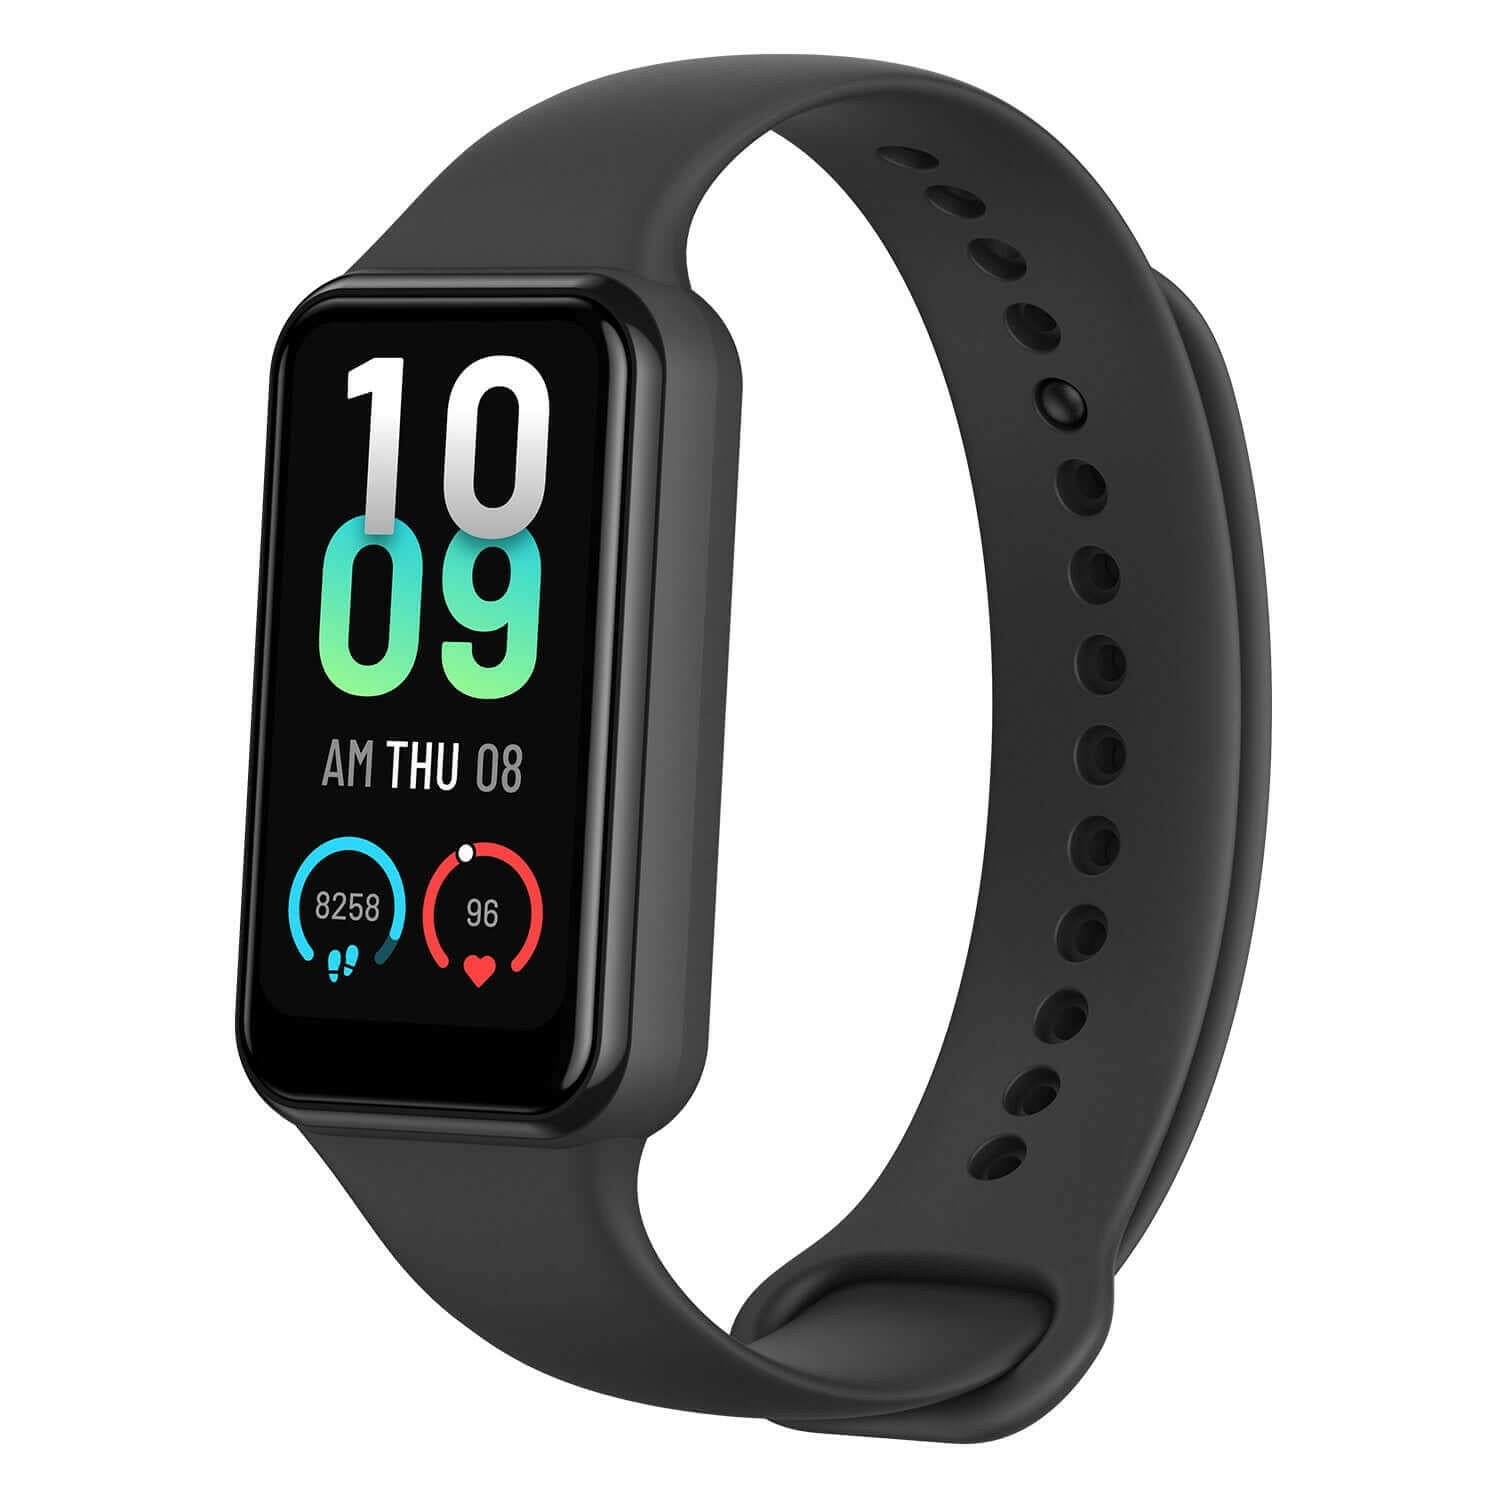  Amazfit Band 7 Fitness & Health Tracker for Women Men, 18-Day  Battery Life, Alexa Built-in, 1.47”AMOLED Display, Heart Rate & SpO2  Monitoring, 120 Sports Modes, 5 ATM Water Resistant (Black, Beige) 